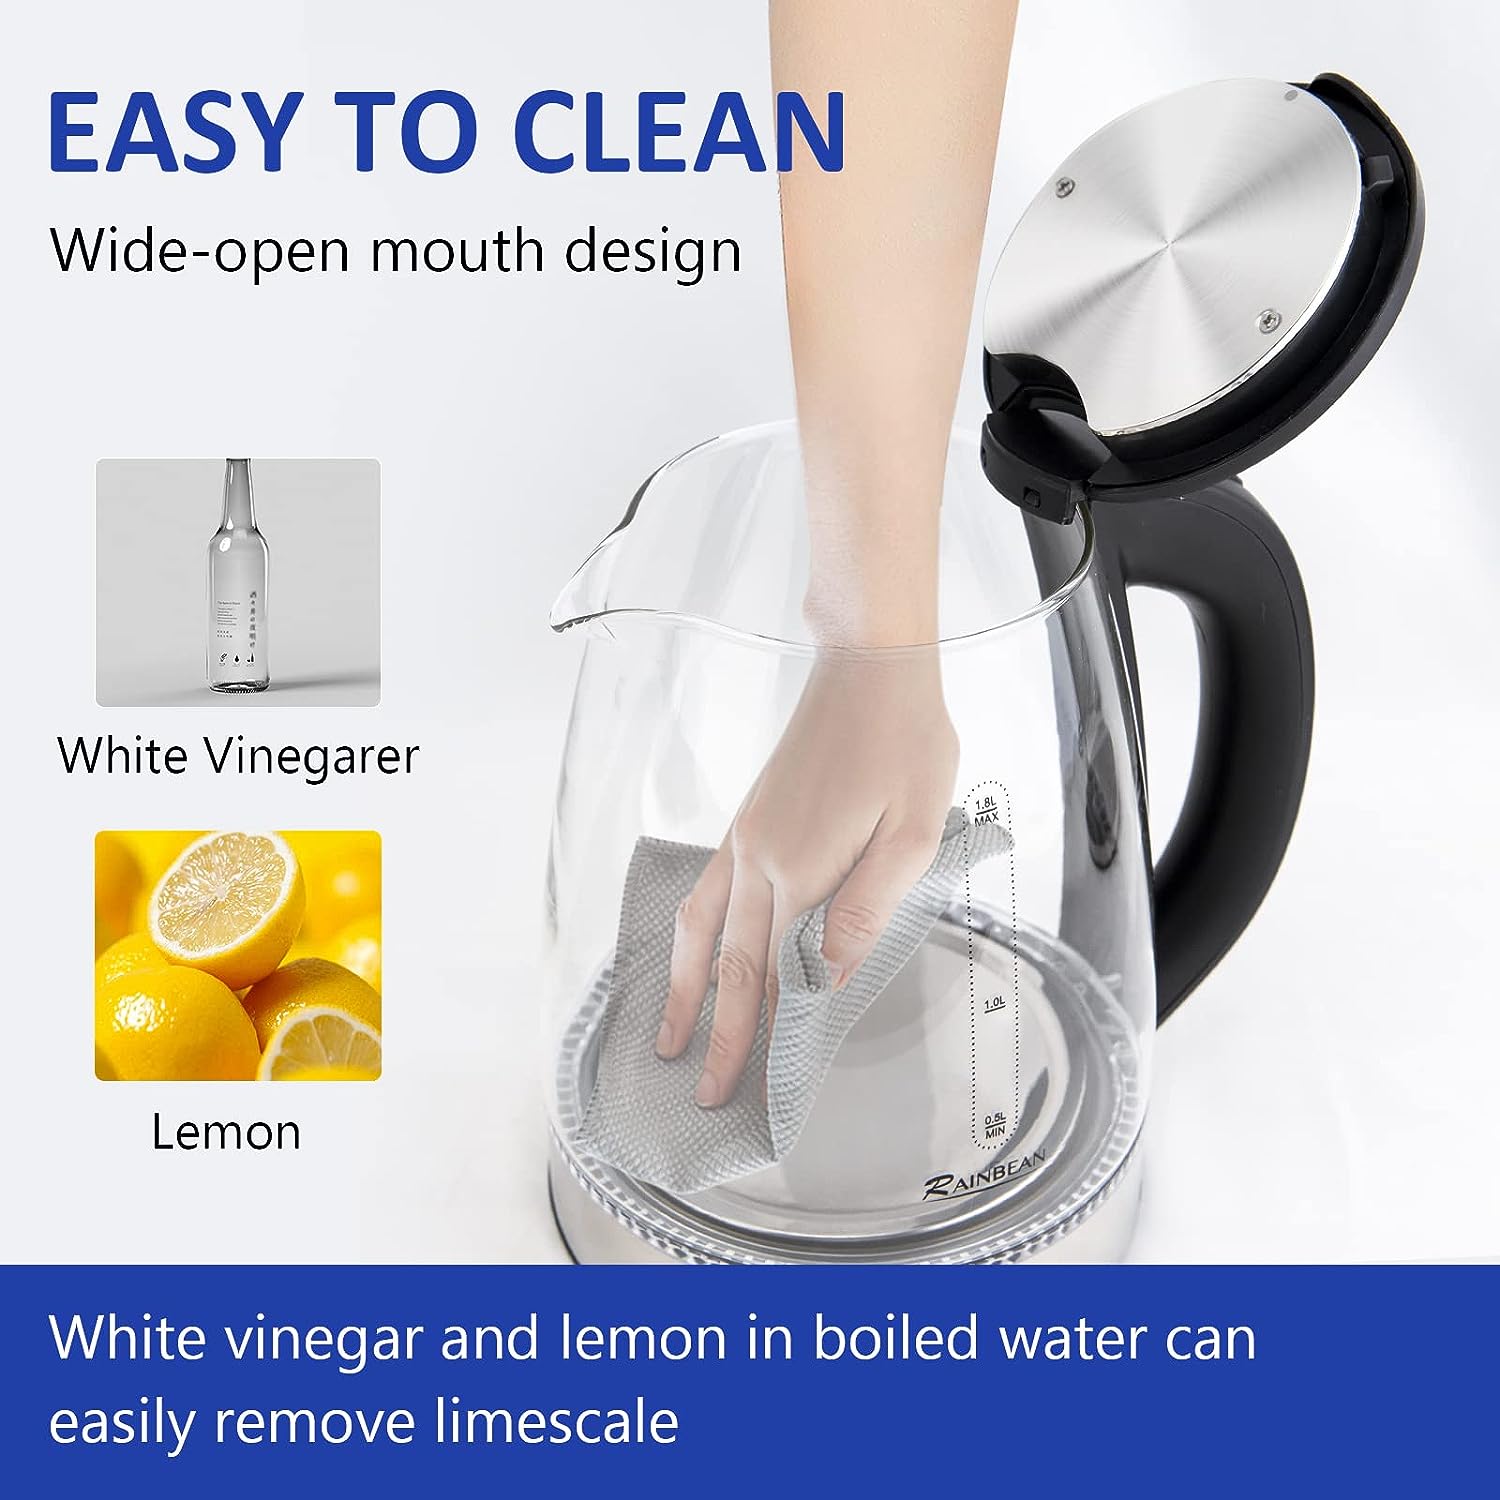 NEW Electric Kettle Water Boiler, 1.8L Electric Tea Kettle, Wide Opening Hot Water Boiler With LED Light, Auto Shut-Off &amp; Boil Dry Protection, Glass Black